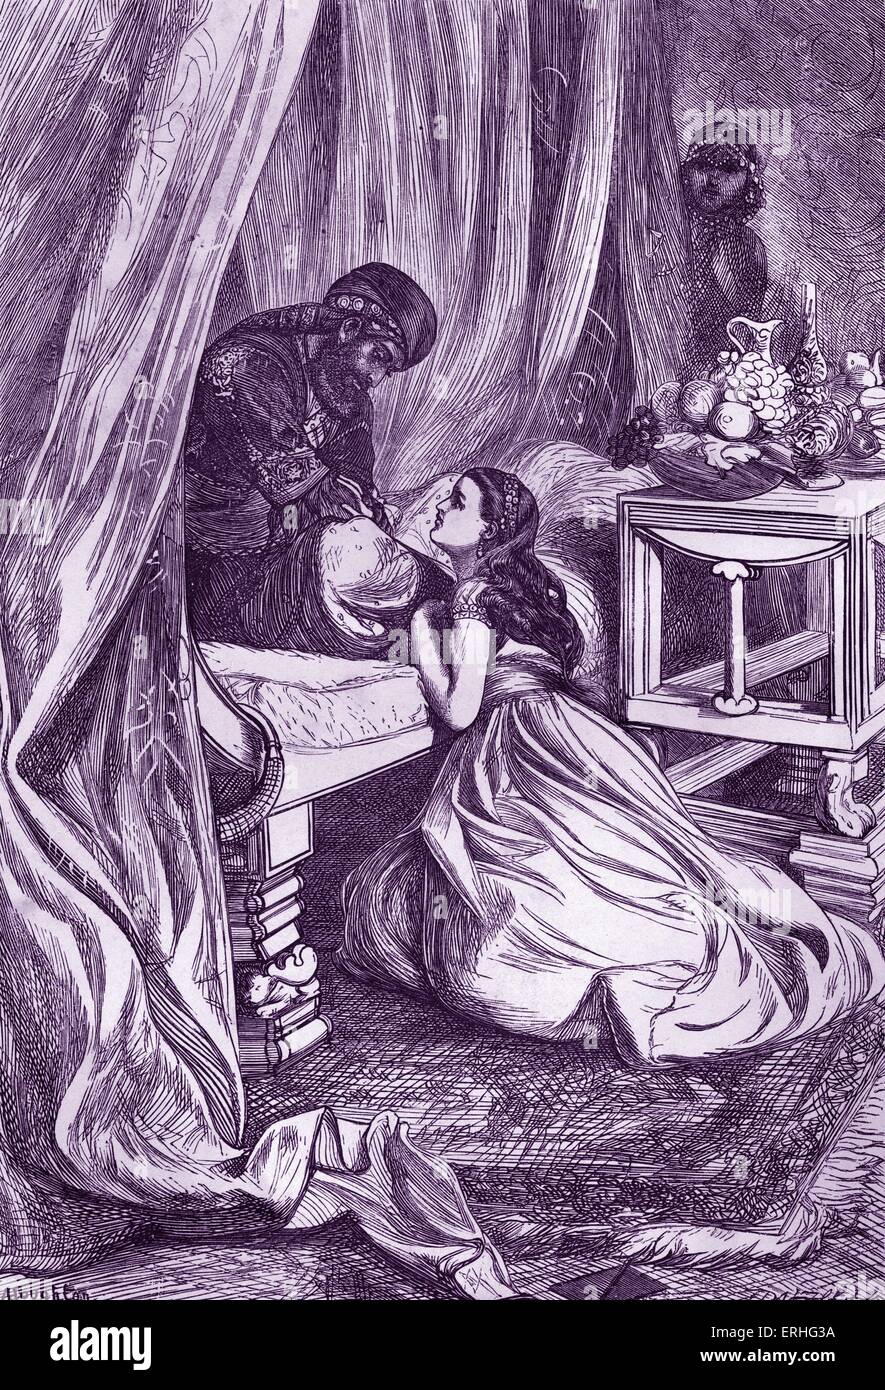 Arabian Nights tale -  A Thousand and One Nights. Caption reads:'The Sultan pardons Scheherazade' Illustration by Arthur Boyd Stock Photo